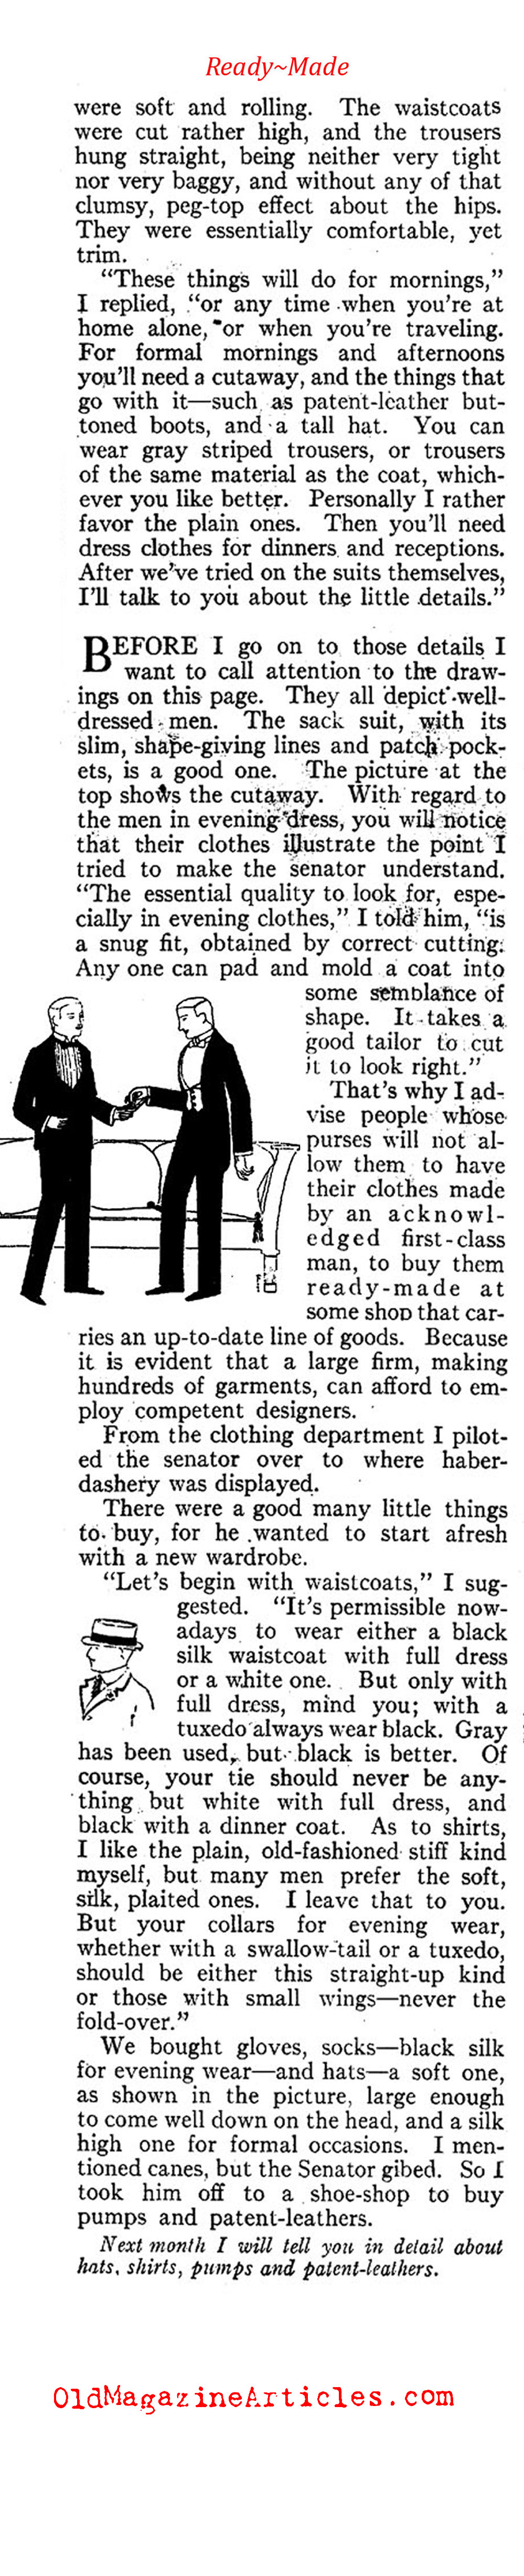 Good Taste and the Year 1914  (The Delineator Magazine, 1914)